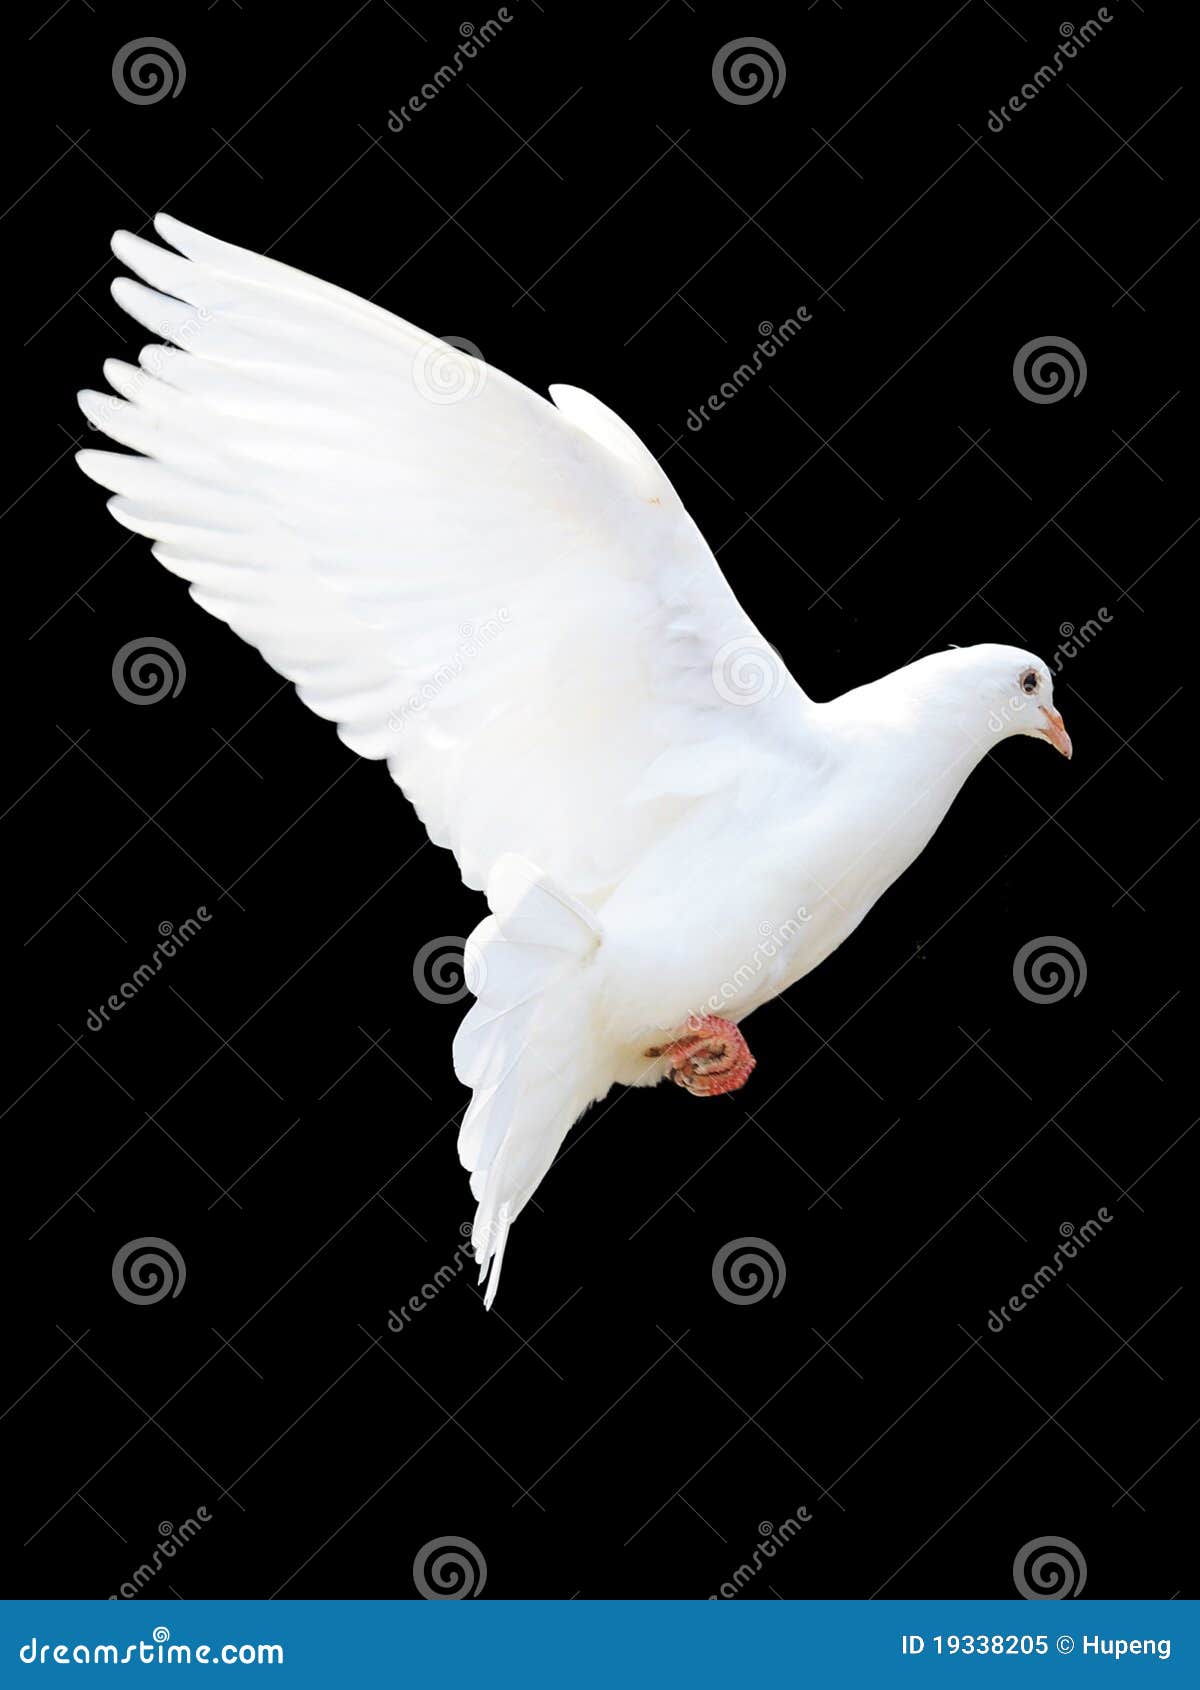 a free flying white dove